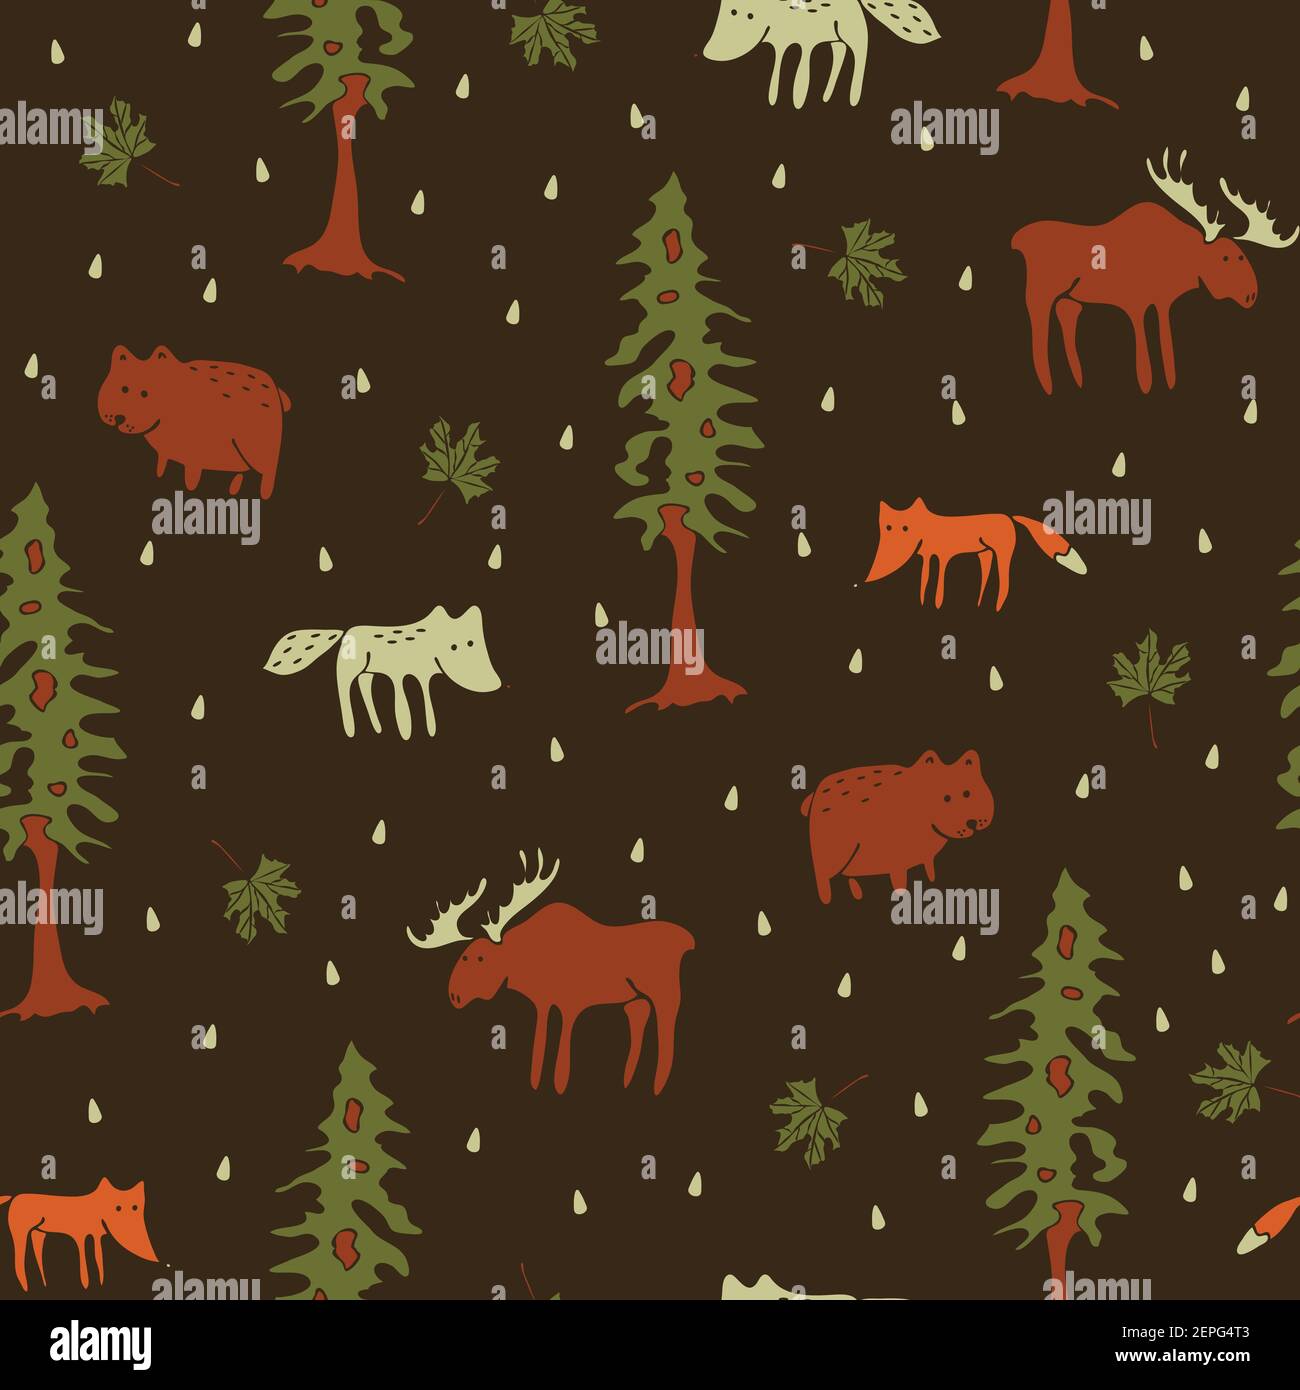 Seamless vector pattern with forest animals on brown background. Cute hand drawn wildlife wallpaper design. Fox, wolf, bear fashion textile. Stock Vector